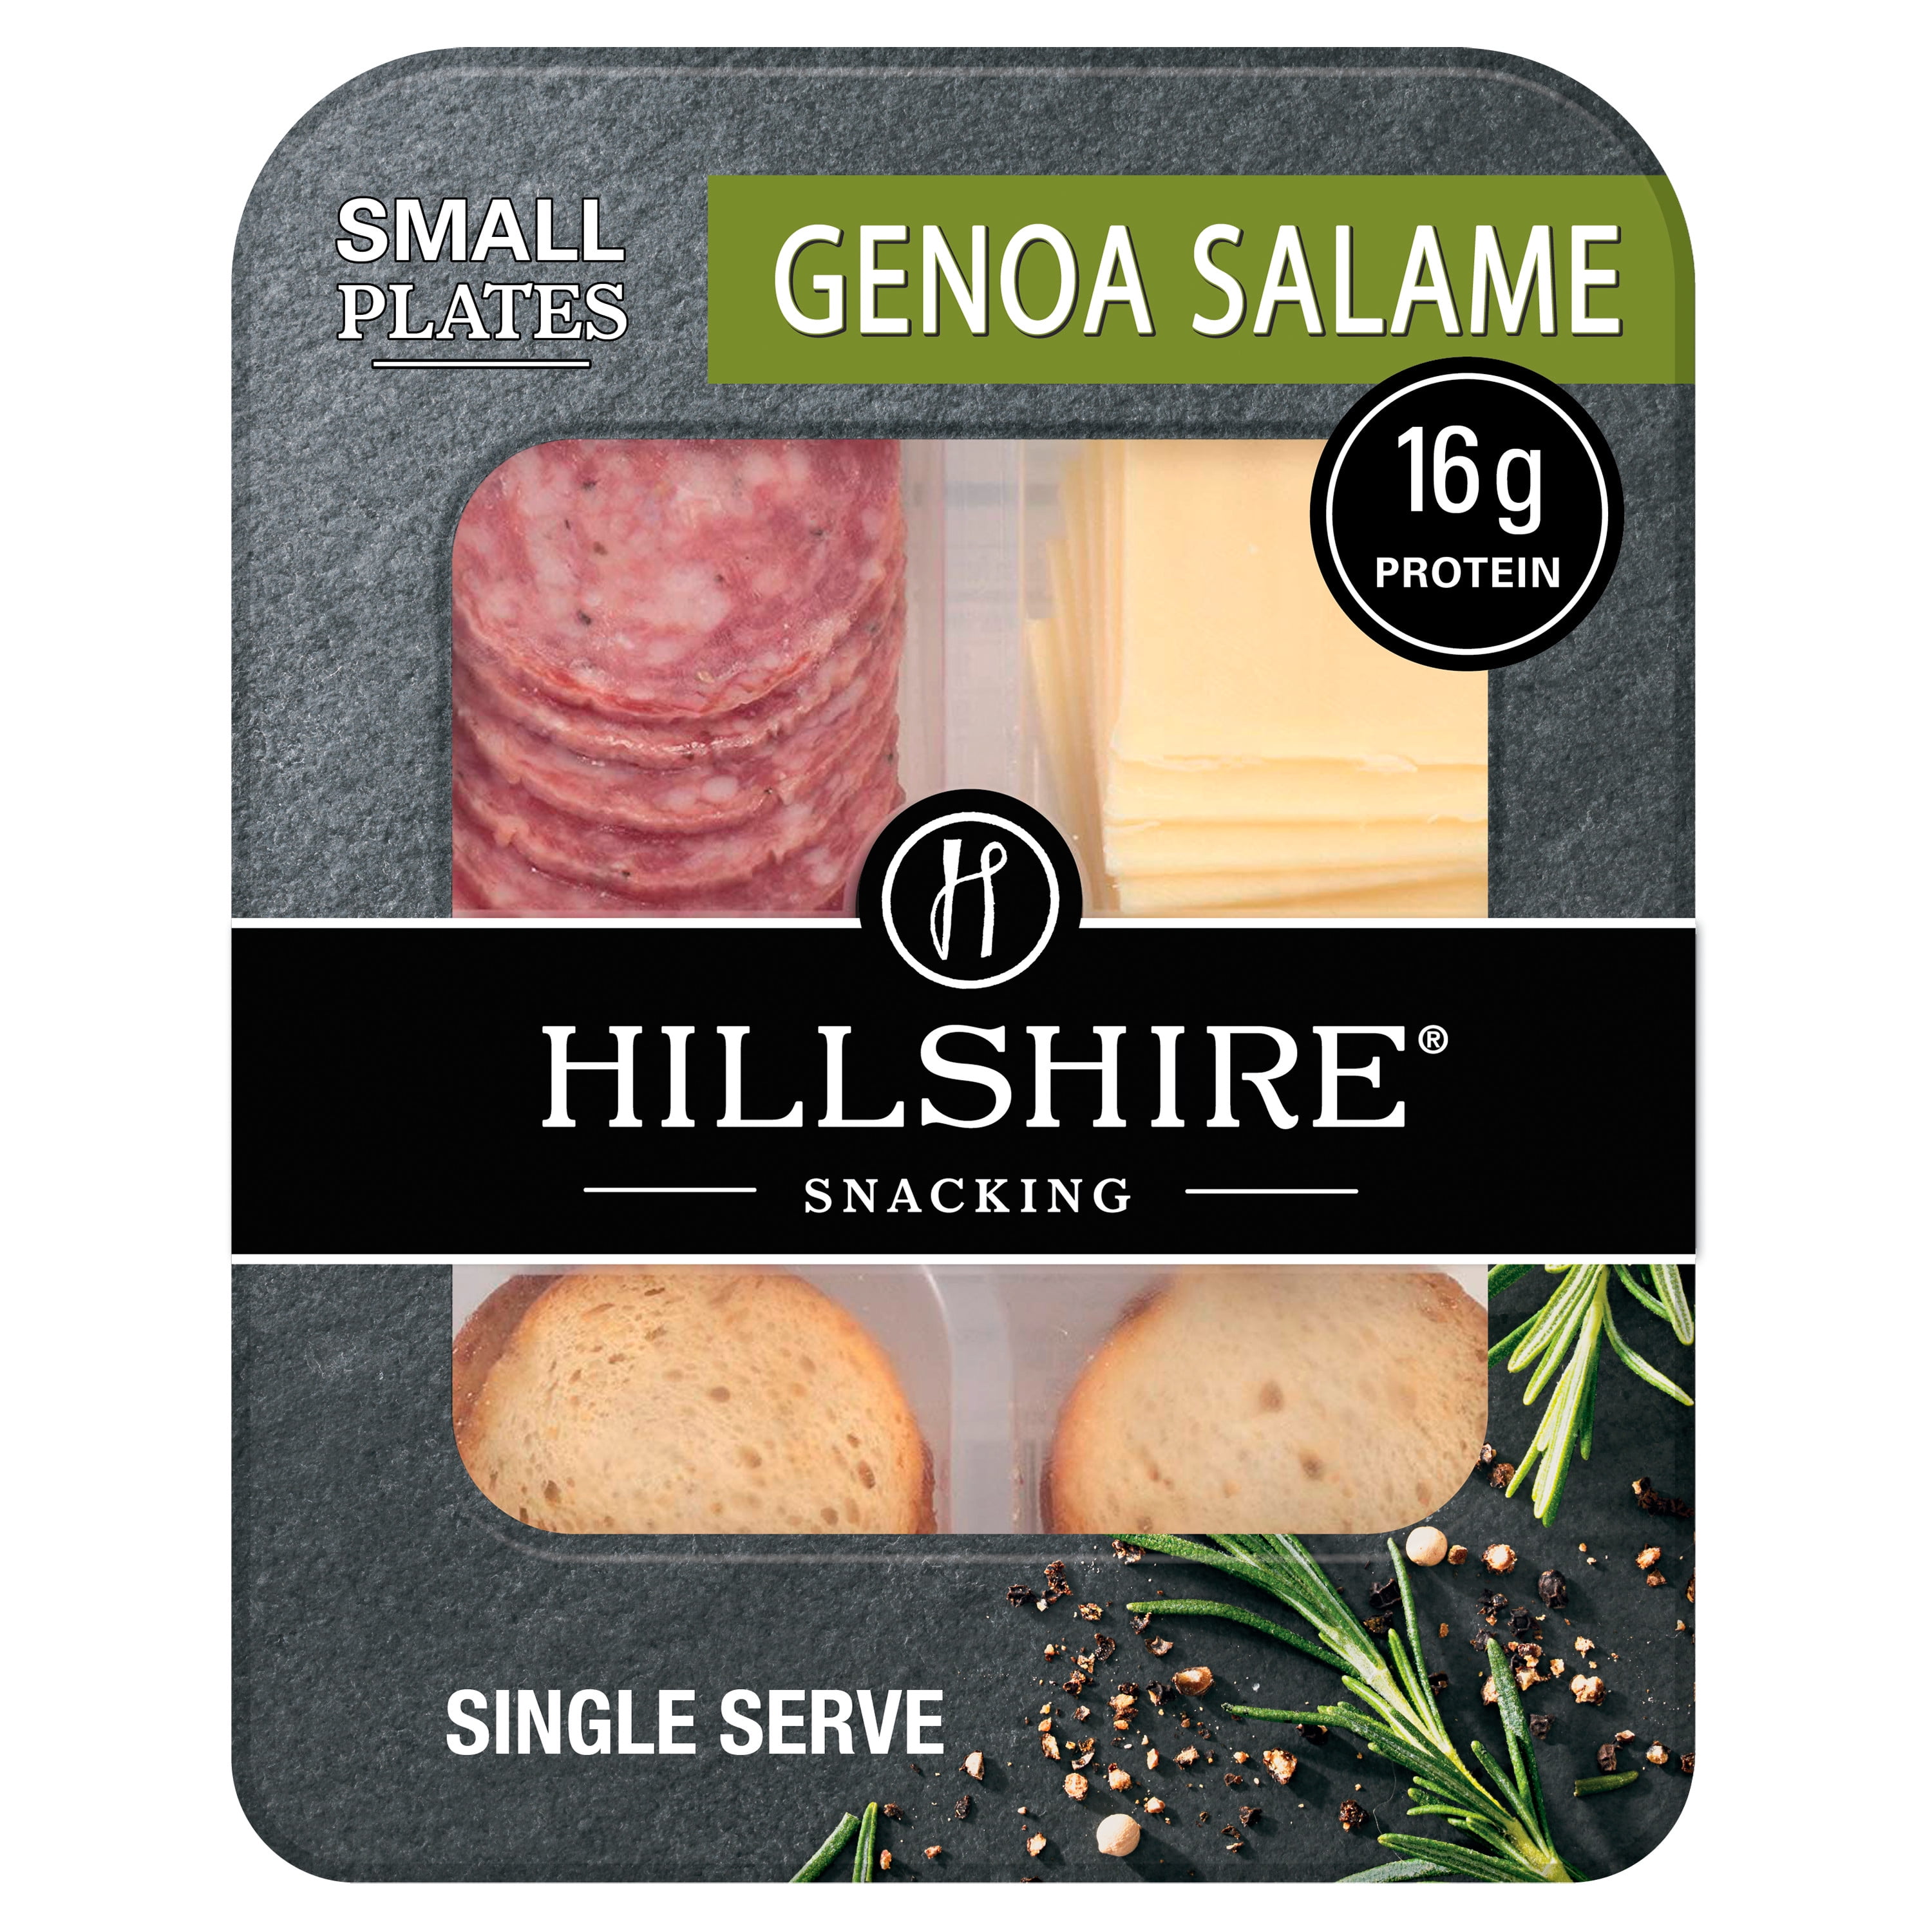 Hillshire Snacking Genoa Salami, White Cheddar Cheese, Toasted Rounds Meat Snack Kit, 2.76 oz